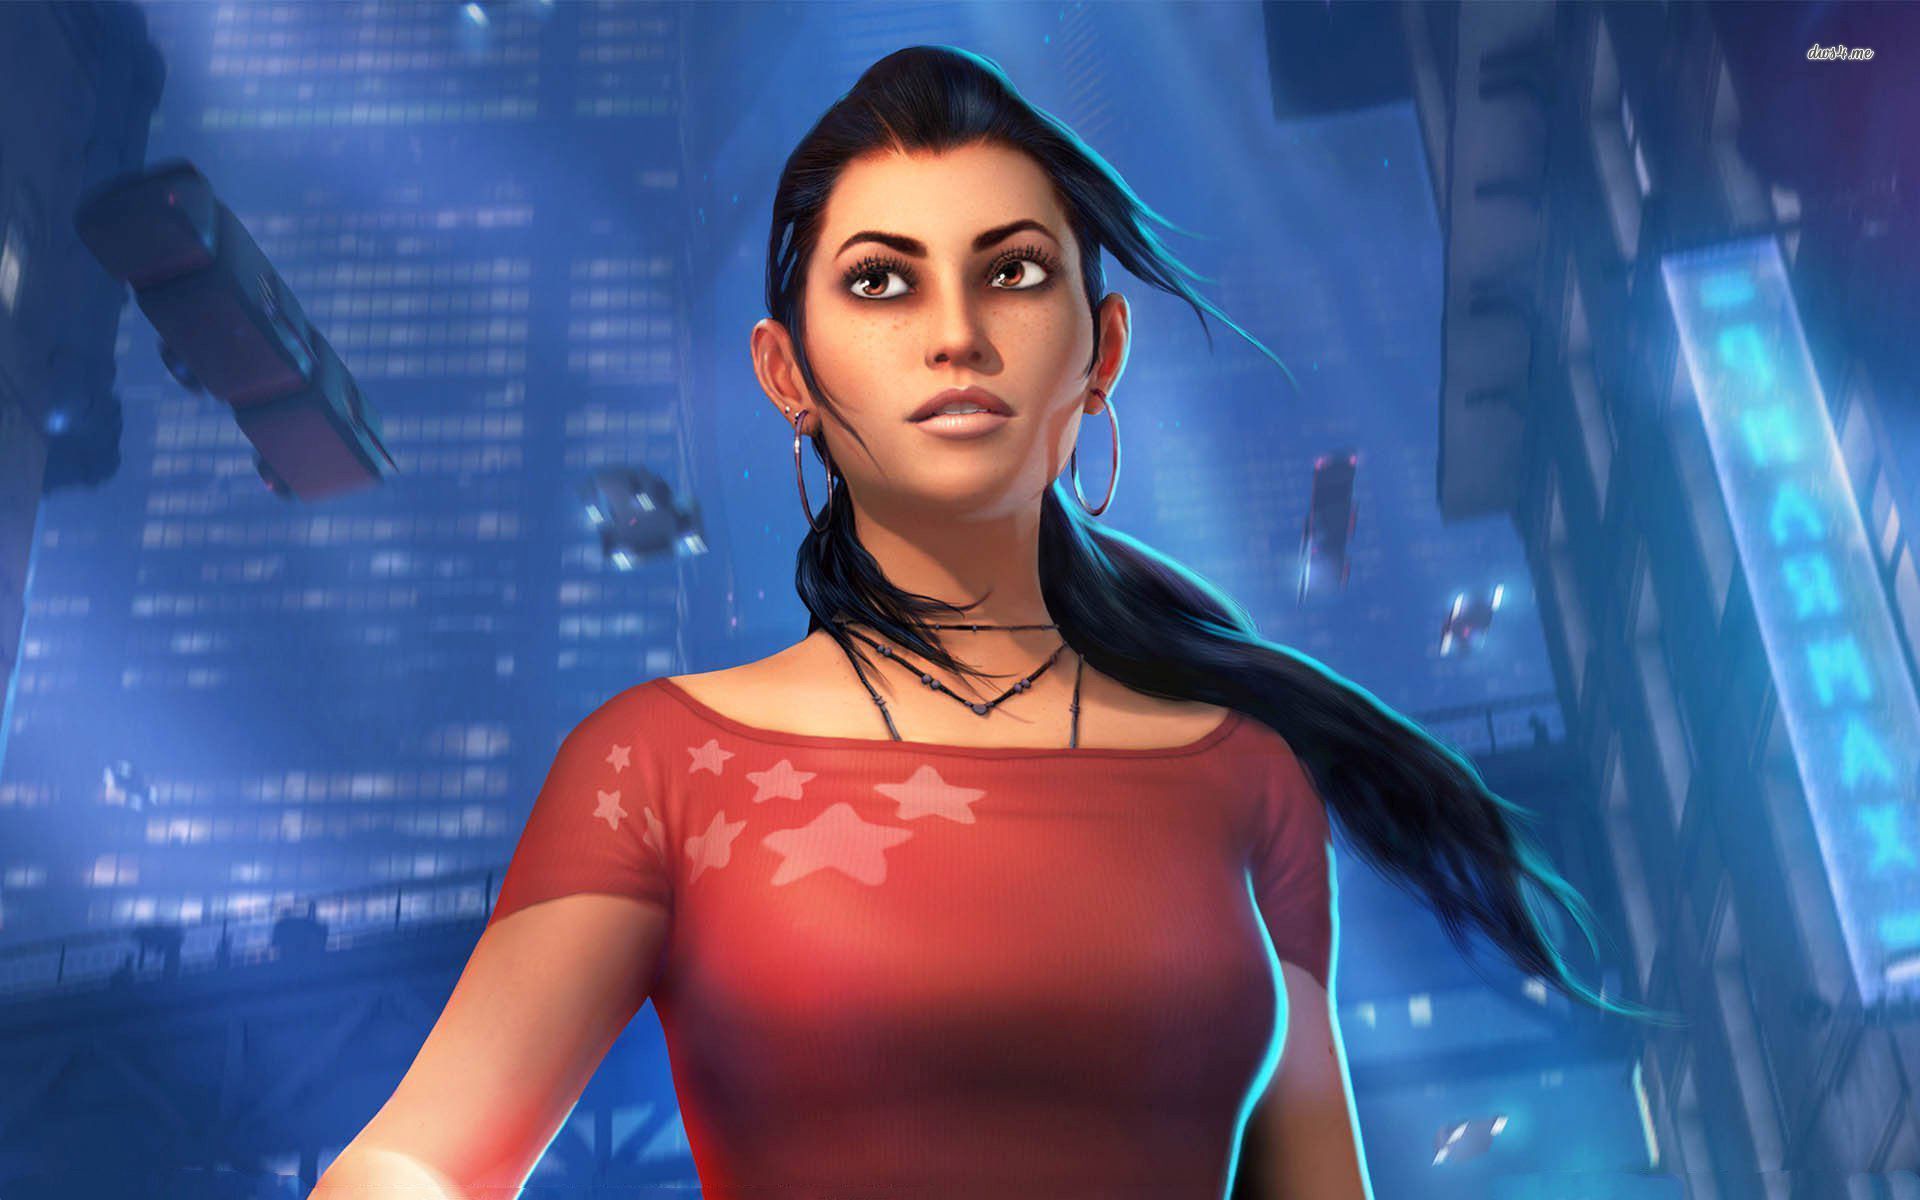 Dreamfall Chapters: The Longest Journey Wallpapers